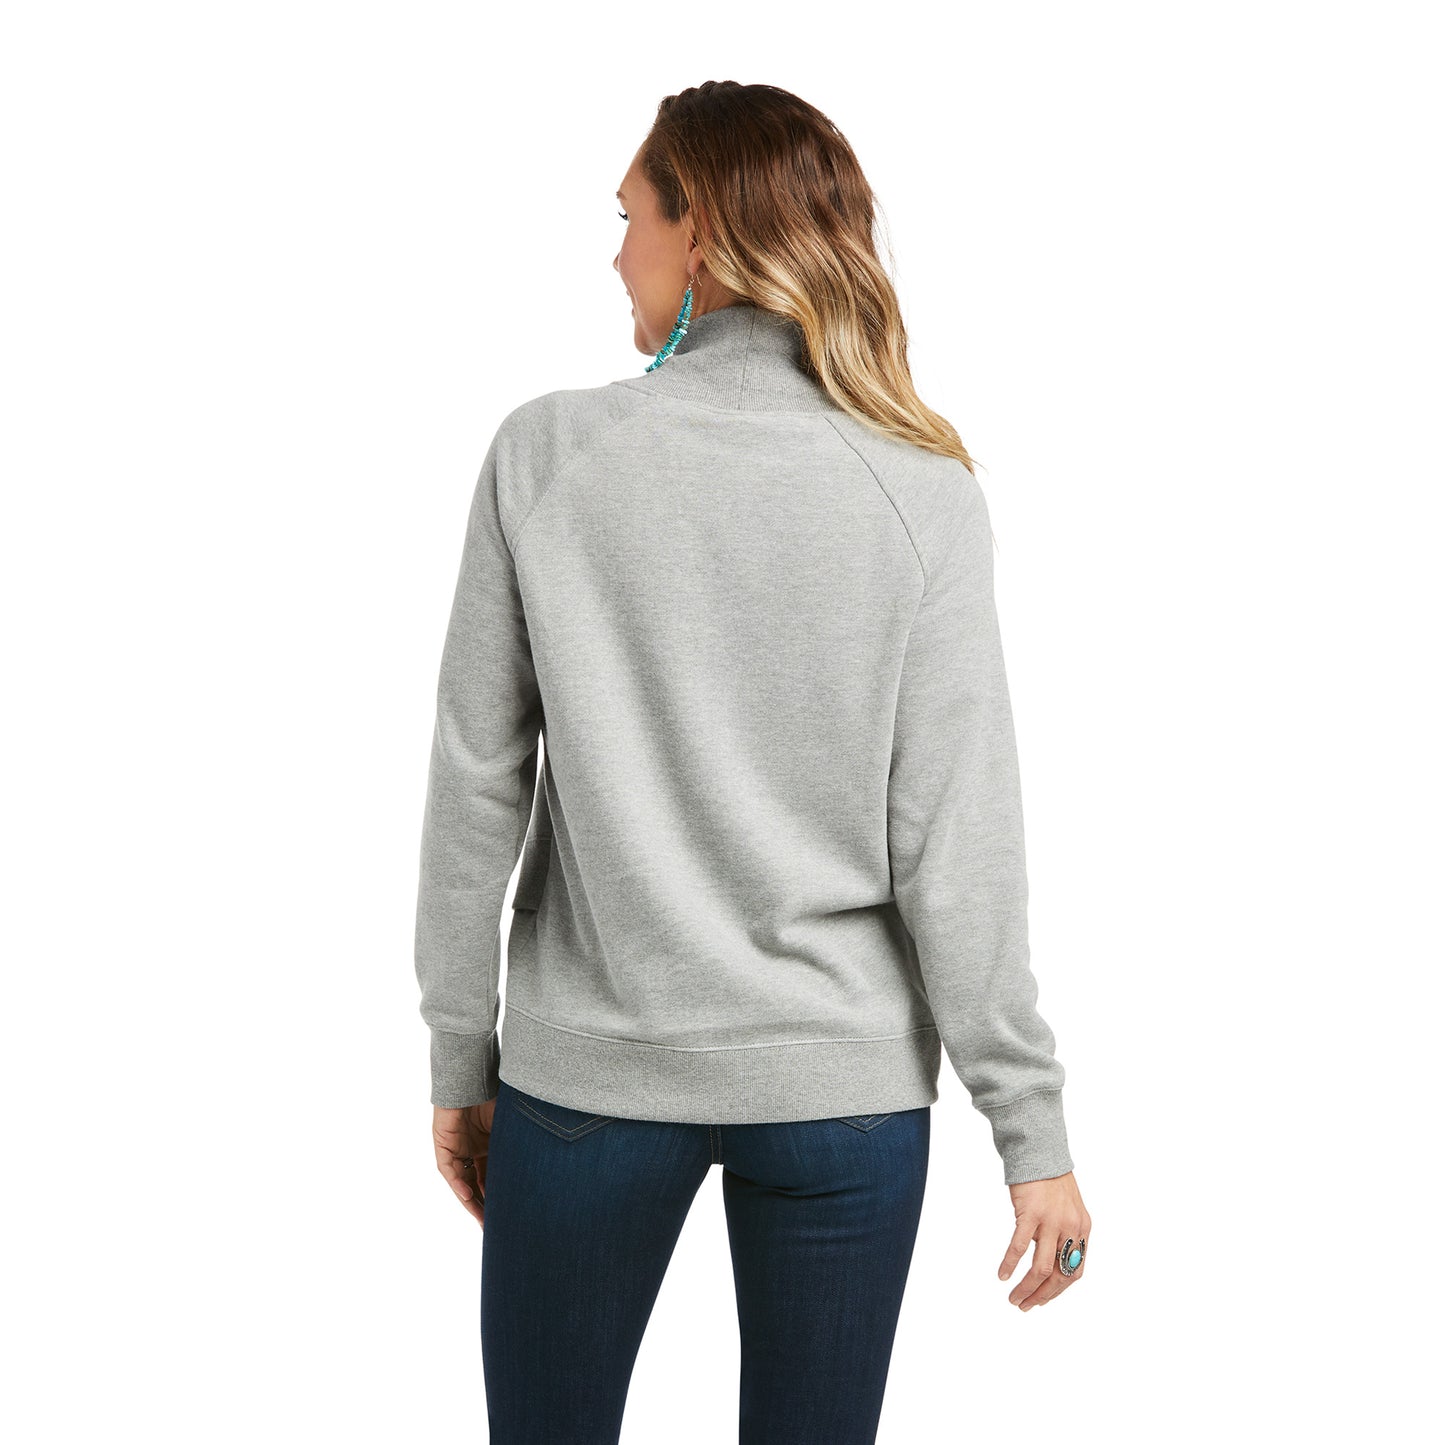 Load image into Gallery viewer, Ariat Ladies REAL Crossover Heather Gray Sweatshirt 10037572
